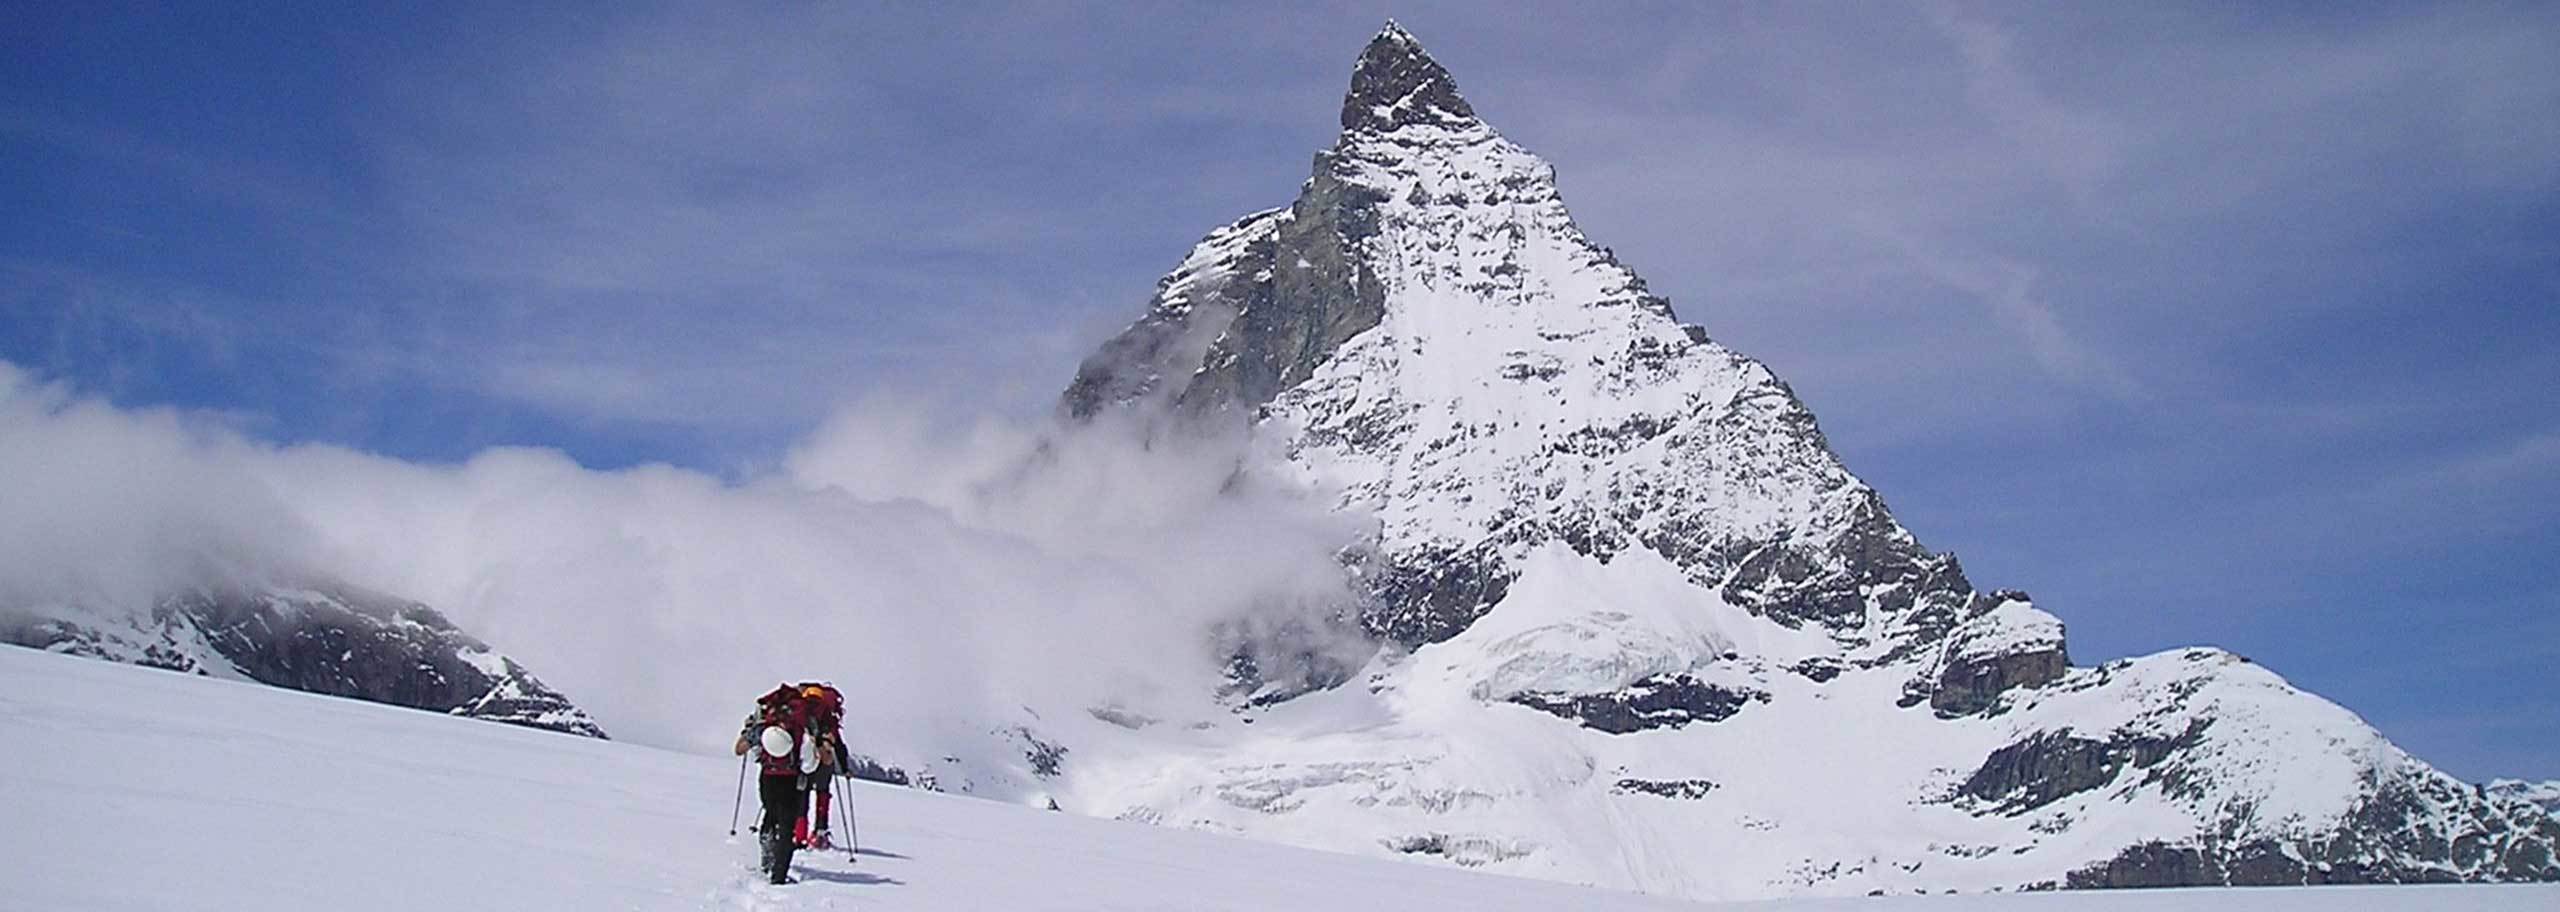 Mountaineering in Cervinia, Guided Mountain Climbing Trips